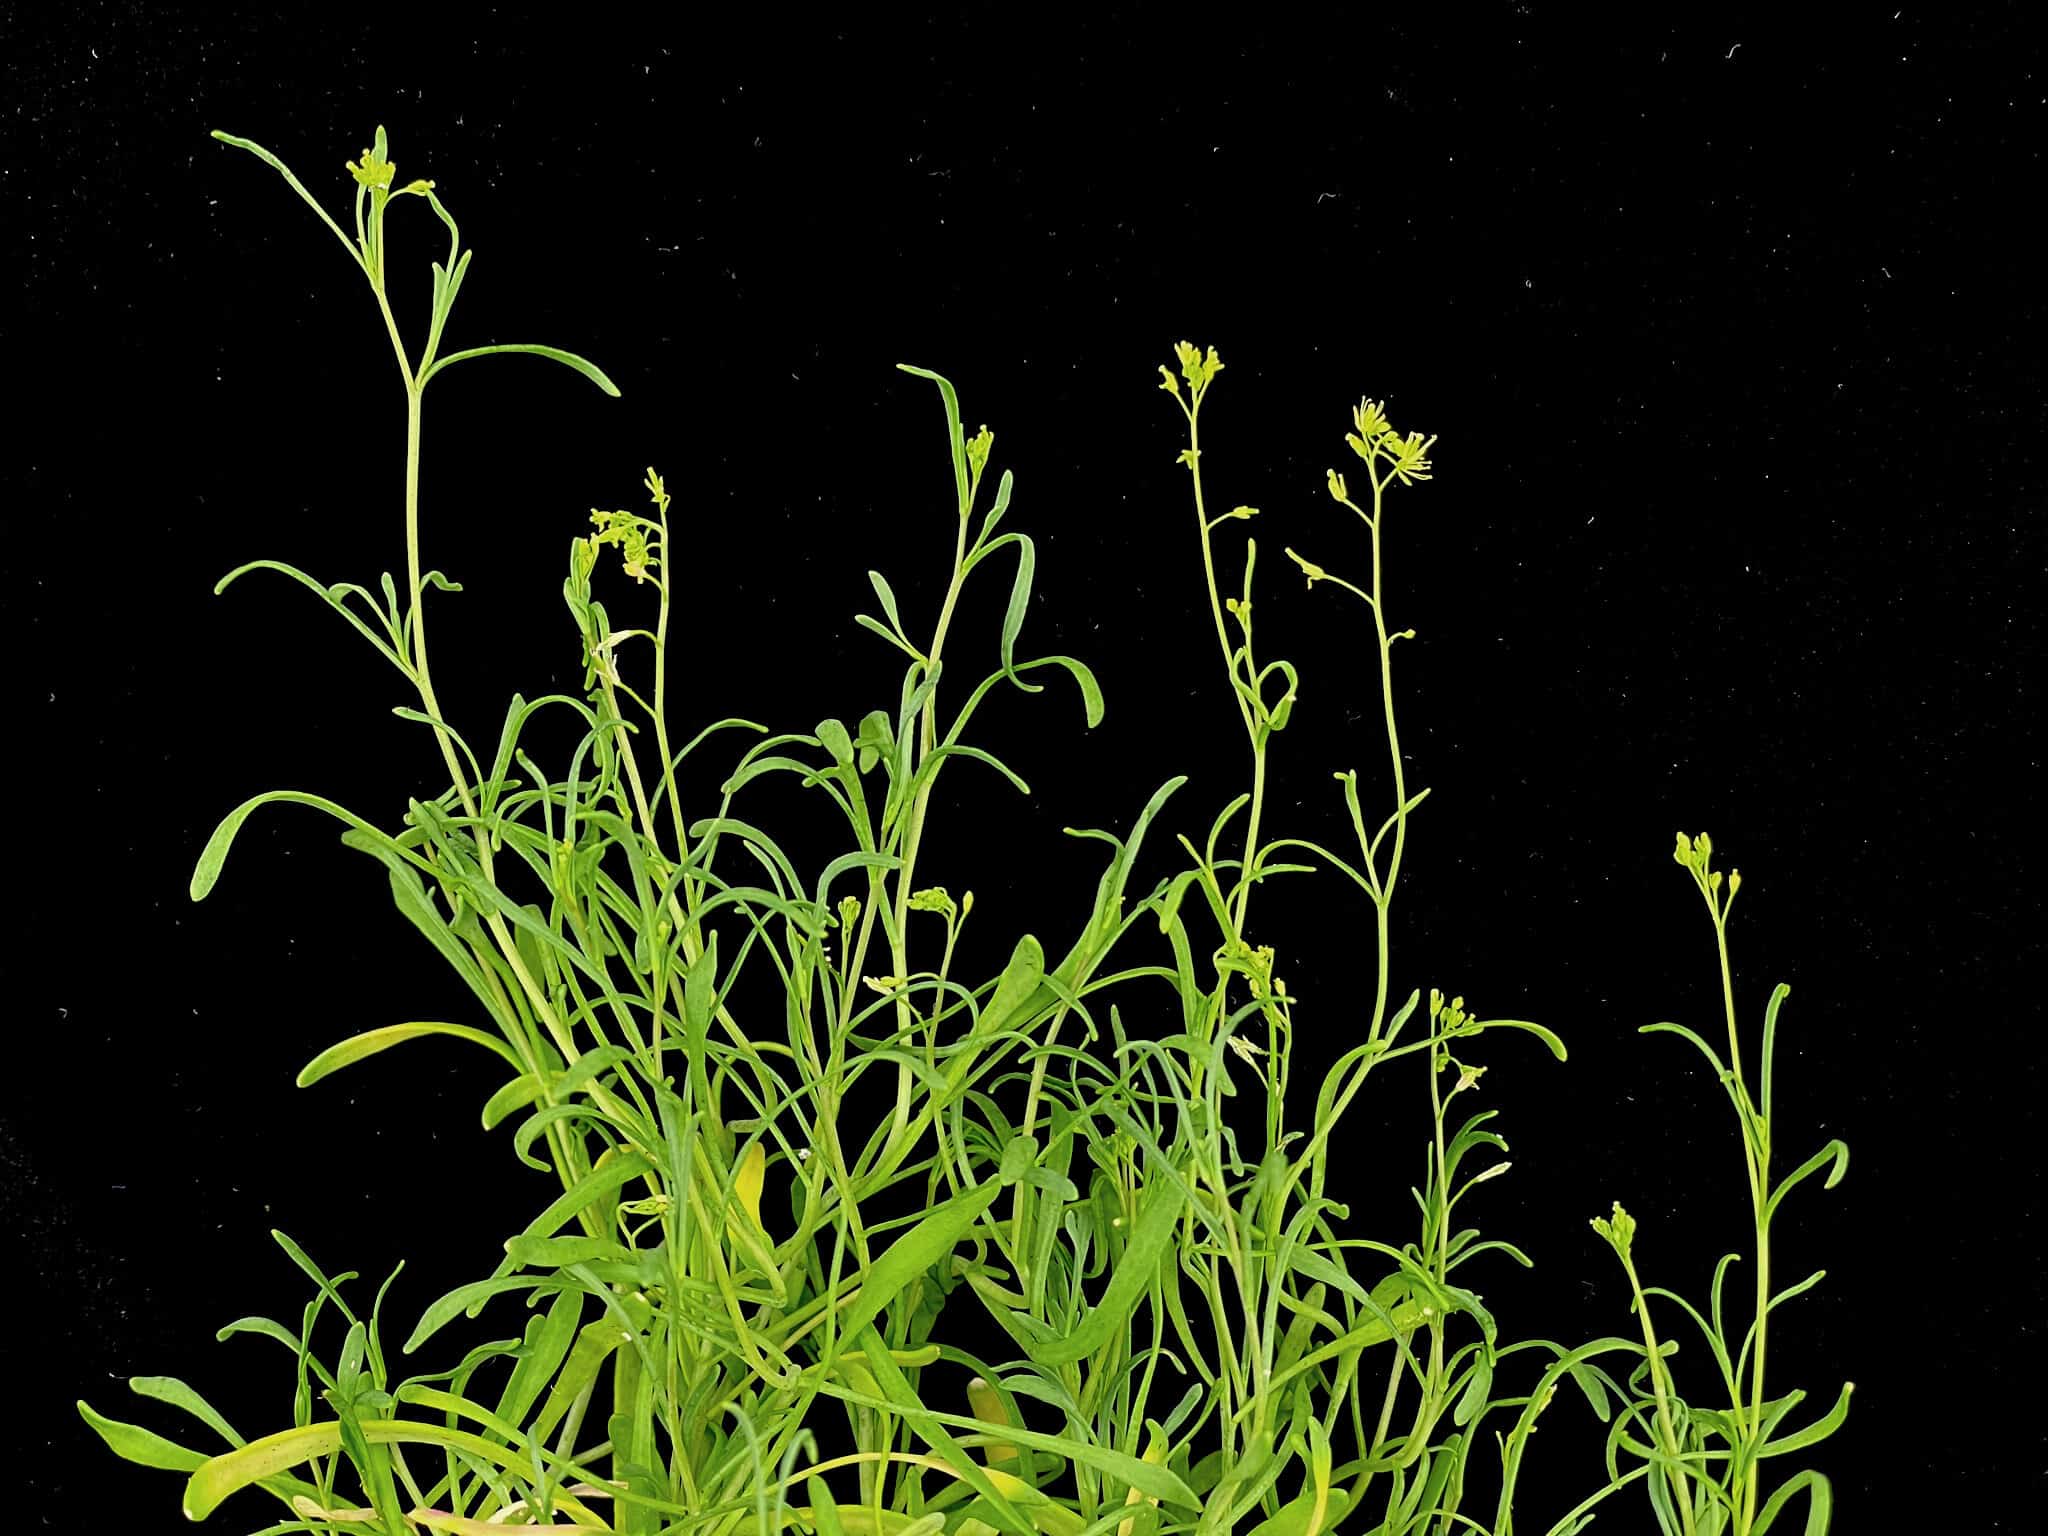 A hardy plant could help us fortify stressed crops